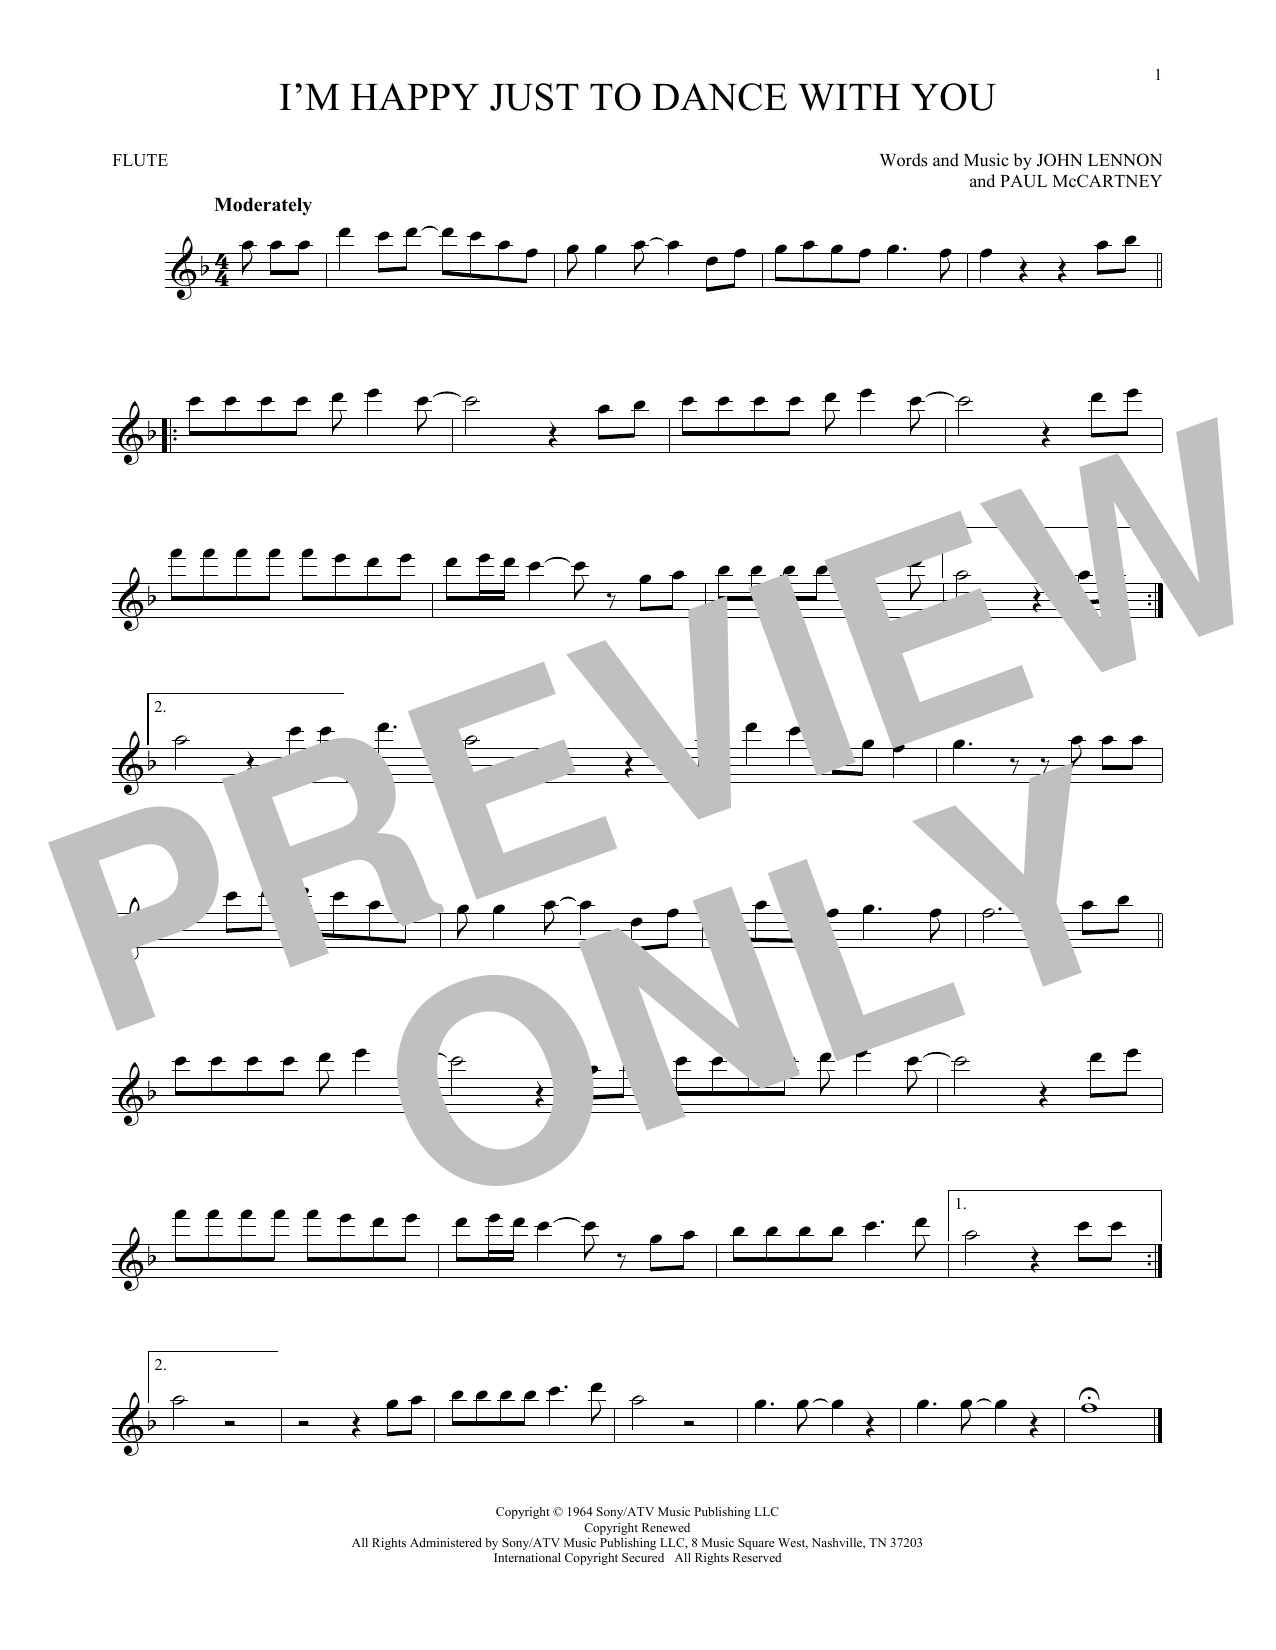 Download The Beatles I'm Happy Just To Dance With You Sheet Music